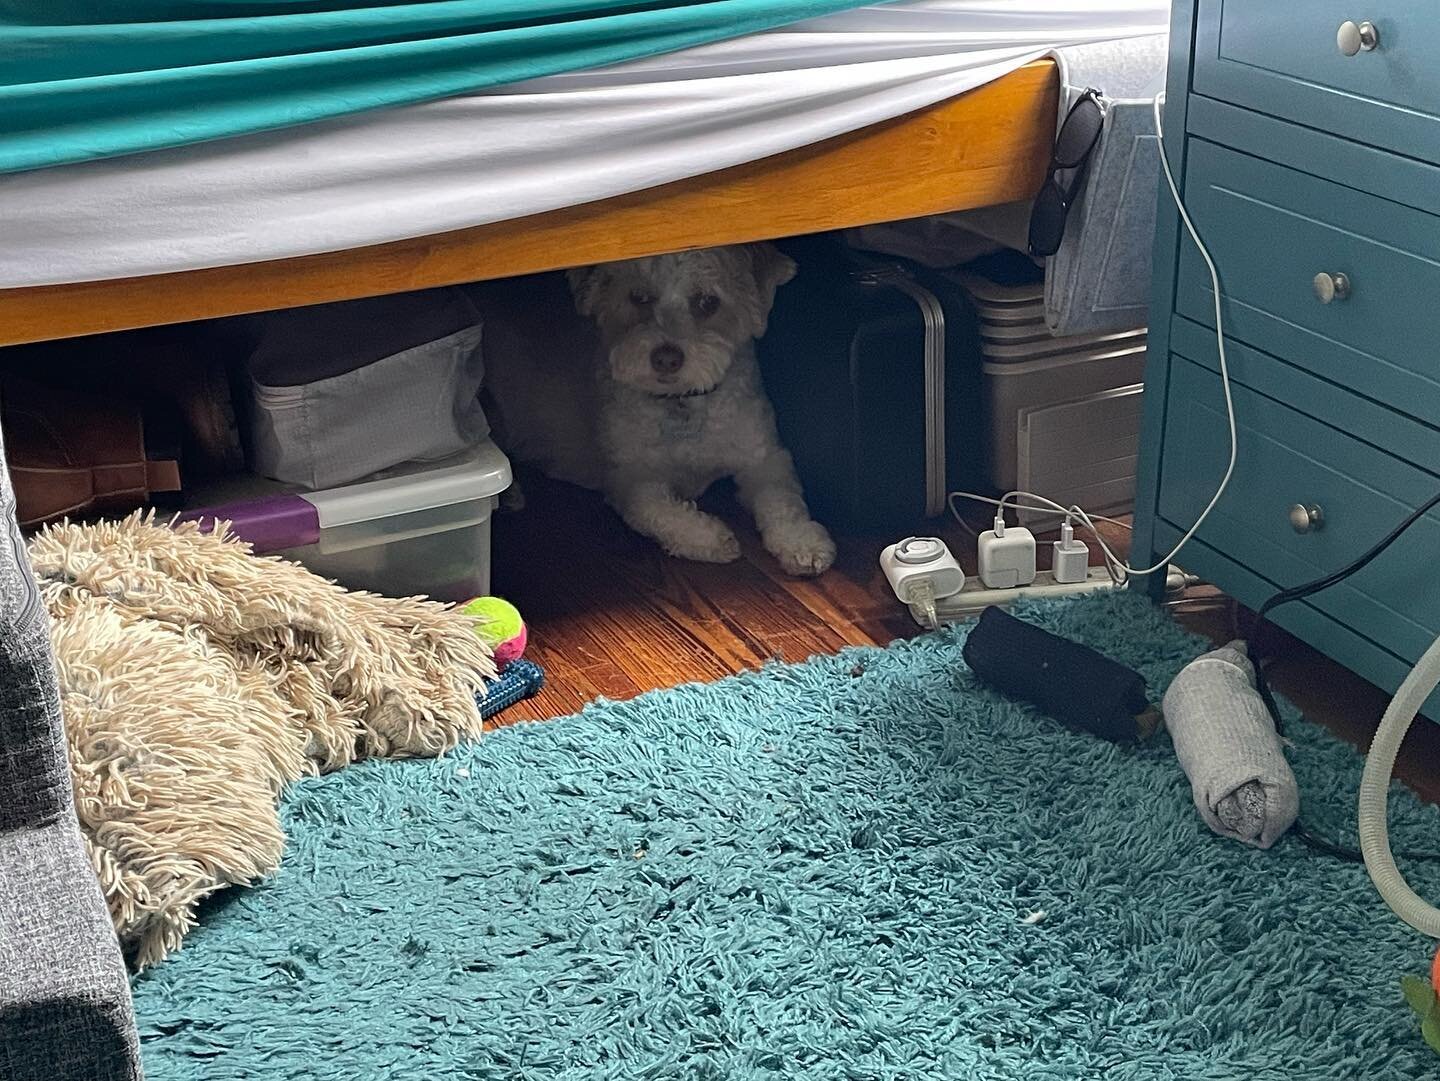 I heard a bark in the other room. It was Colby apparently claiming the space I cleared out under the bed. #havaneseofinstagram #havanesepuppy #itscolby #itscolbynotcoby #underbedstorage #dogcave